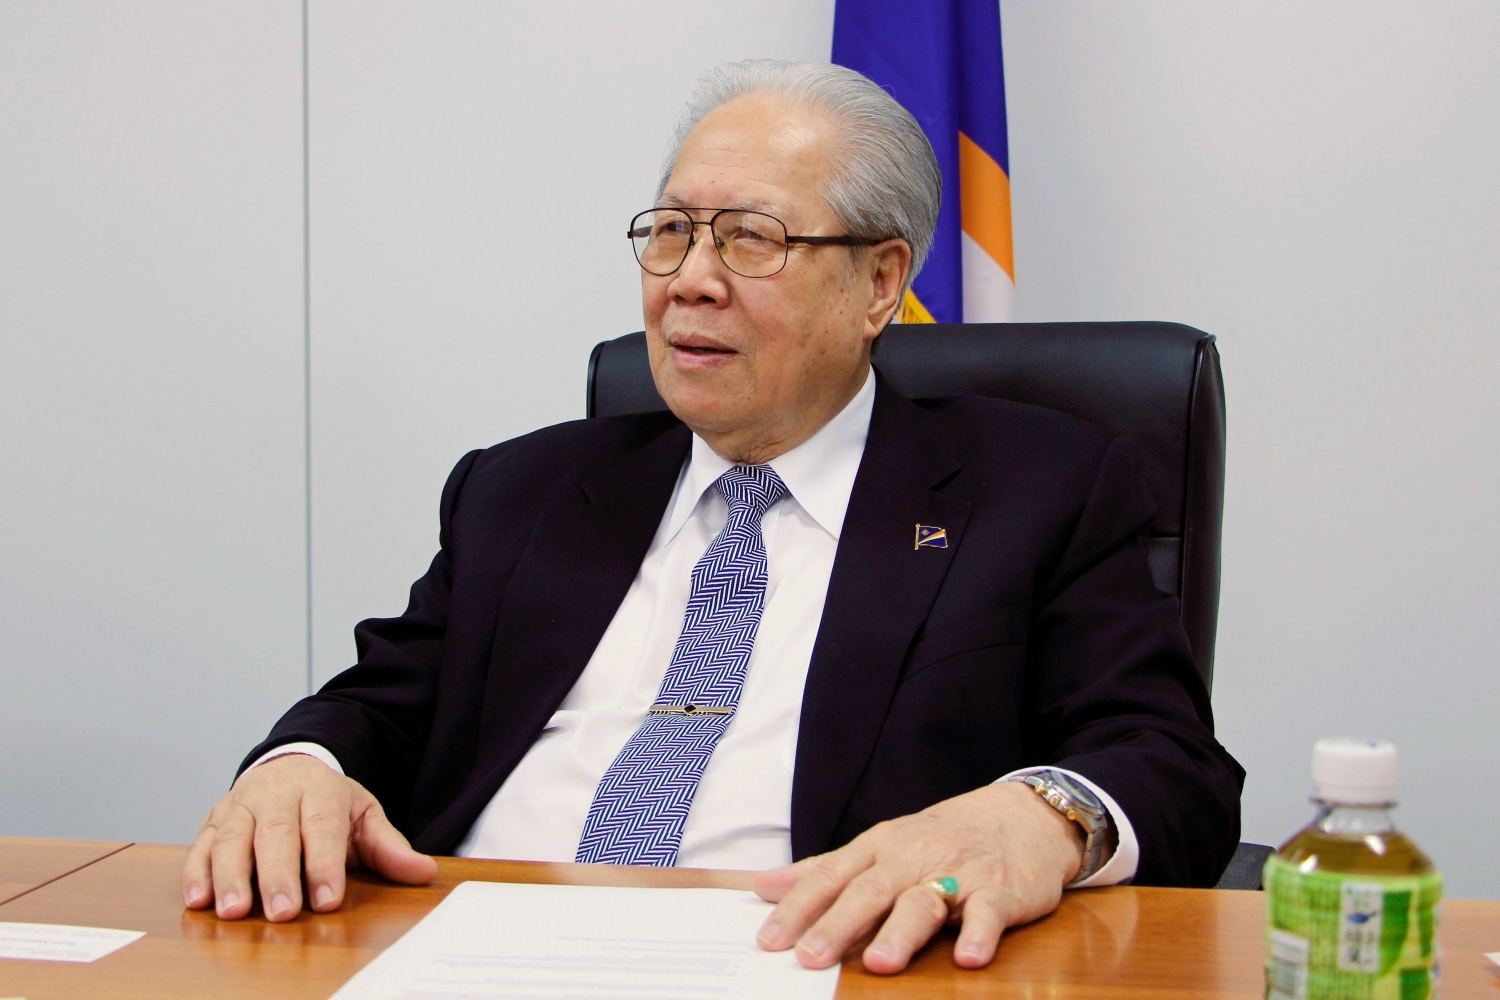 Interview: H.E. Mr. Alexander Carter BING, Ambassador of the Republic of the Marshall Islands to Japan